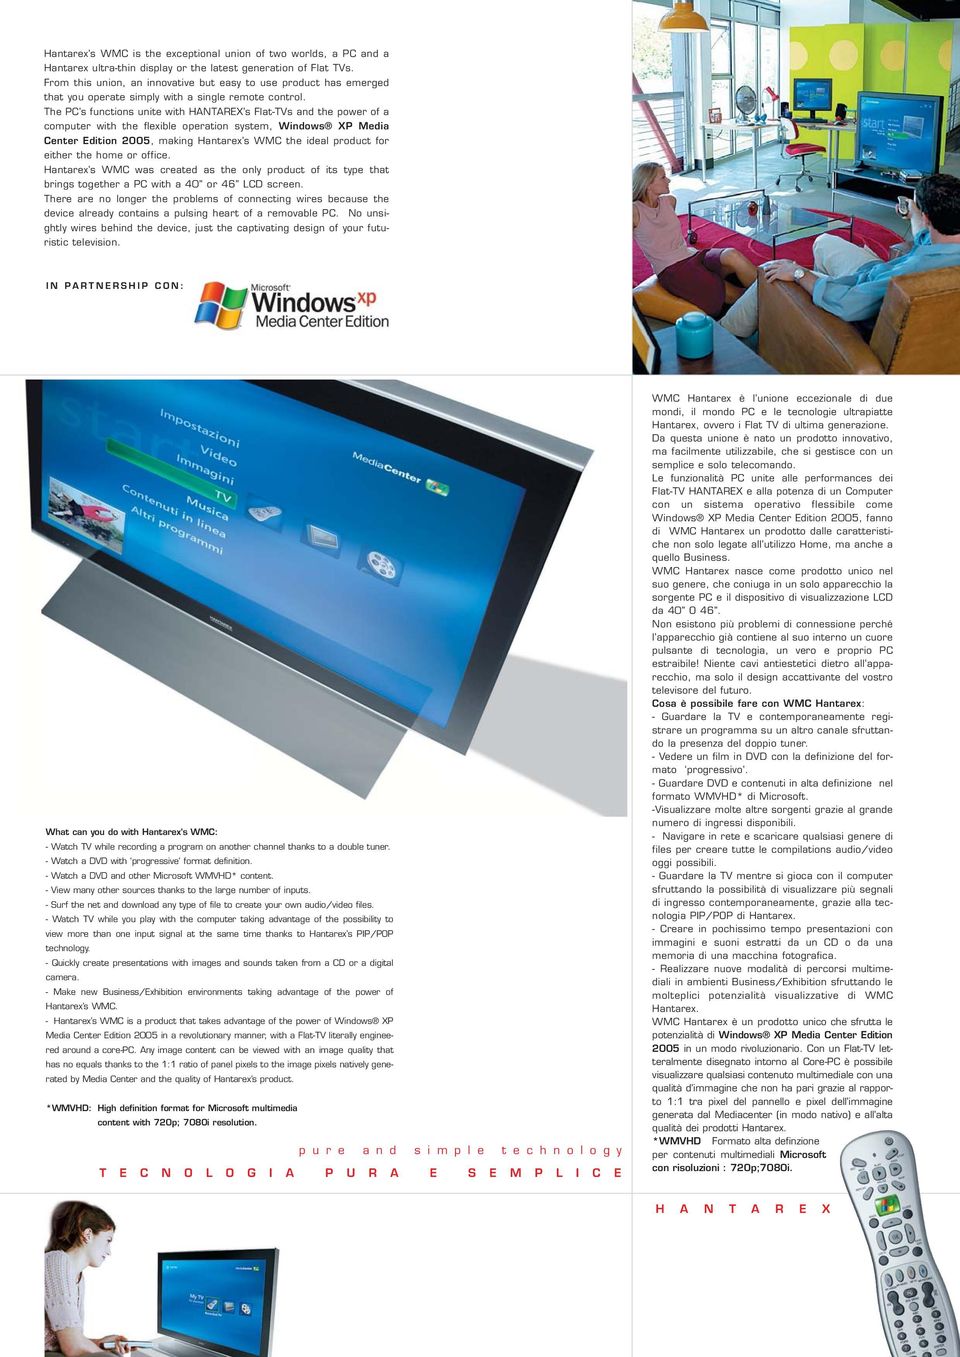 The PC s functions unite with HANTAREX s Flat-TVs and the power of a computer with the flexible operation system, Windows XP Media Center Edition 2005, making Hantarex s WMC the ideal product for